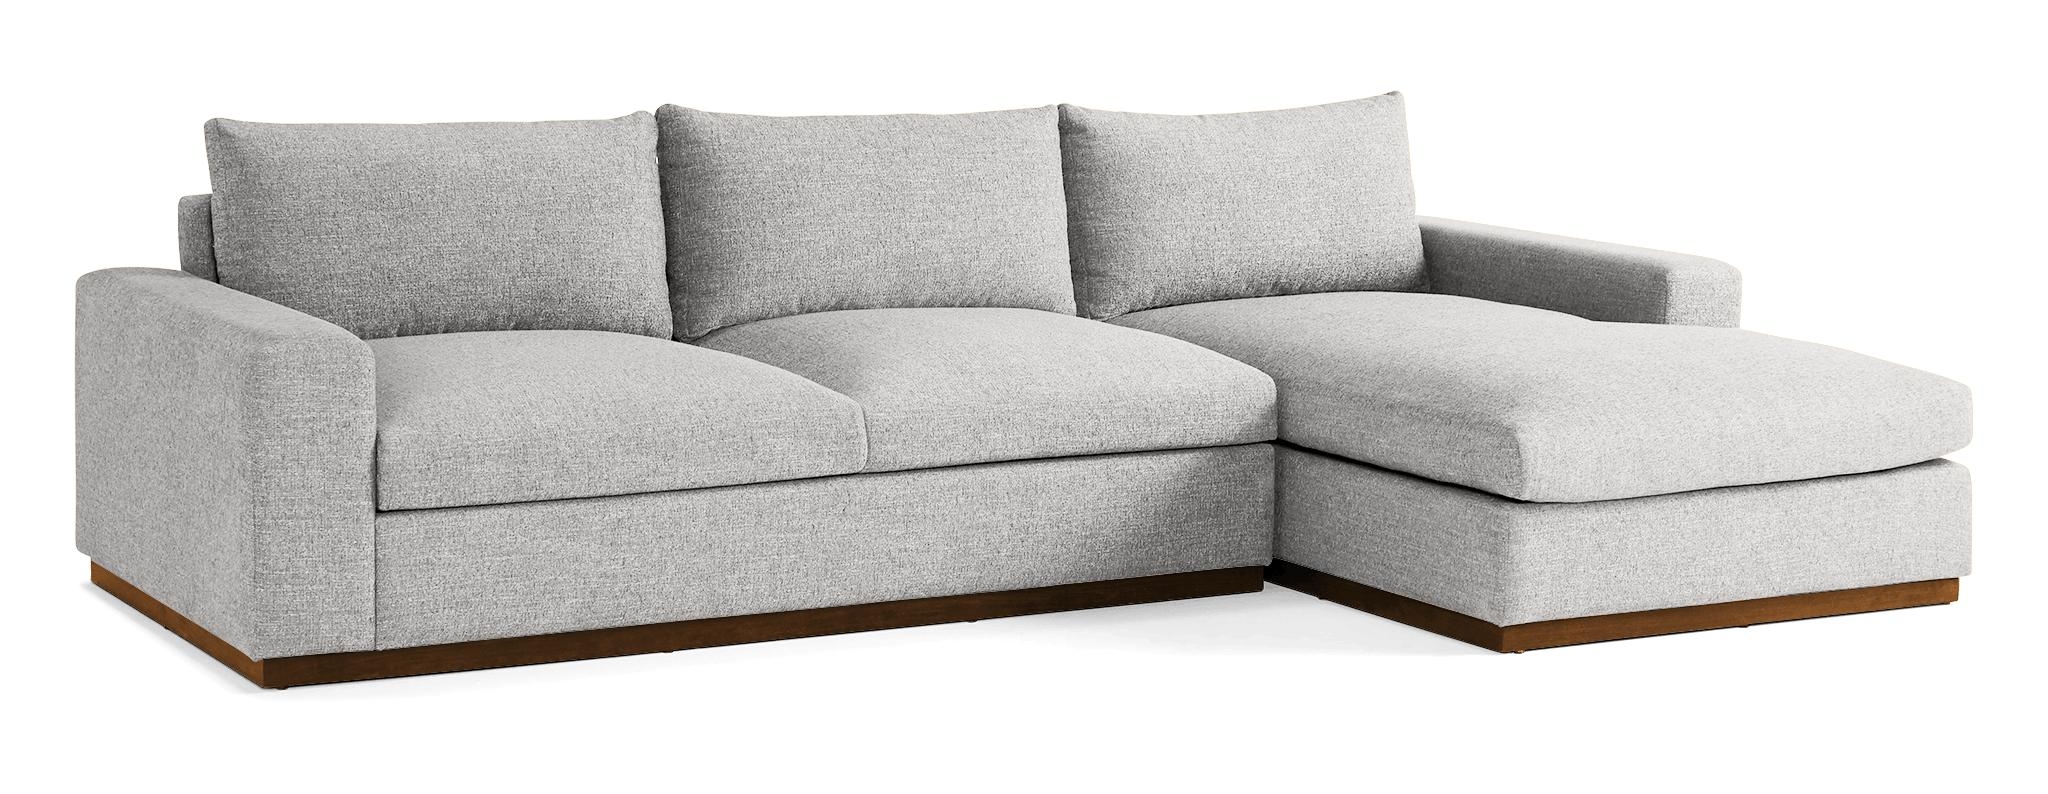 Holt Sectional with Storage - Milo Dove - Image 1